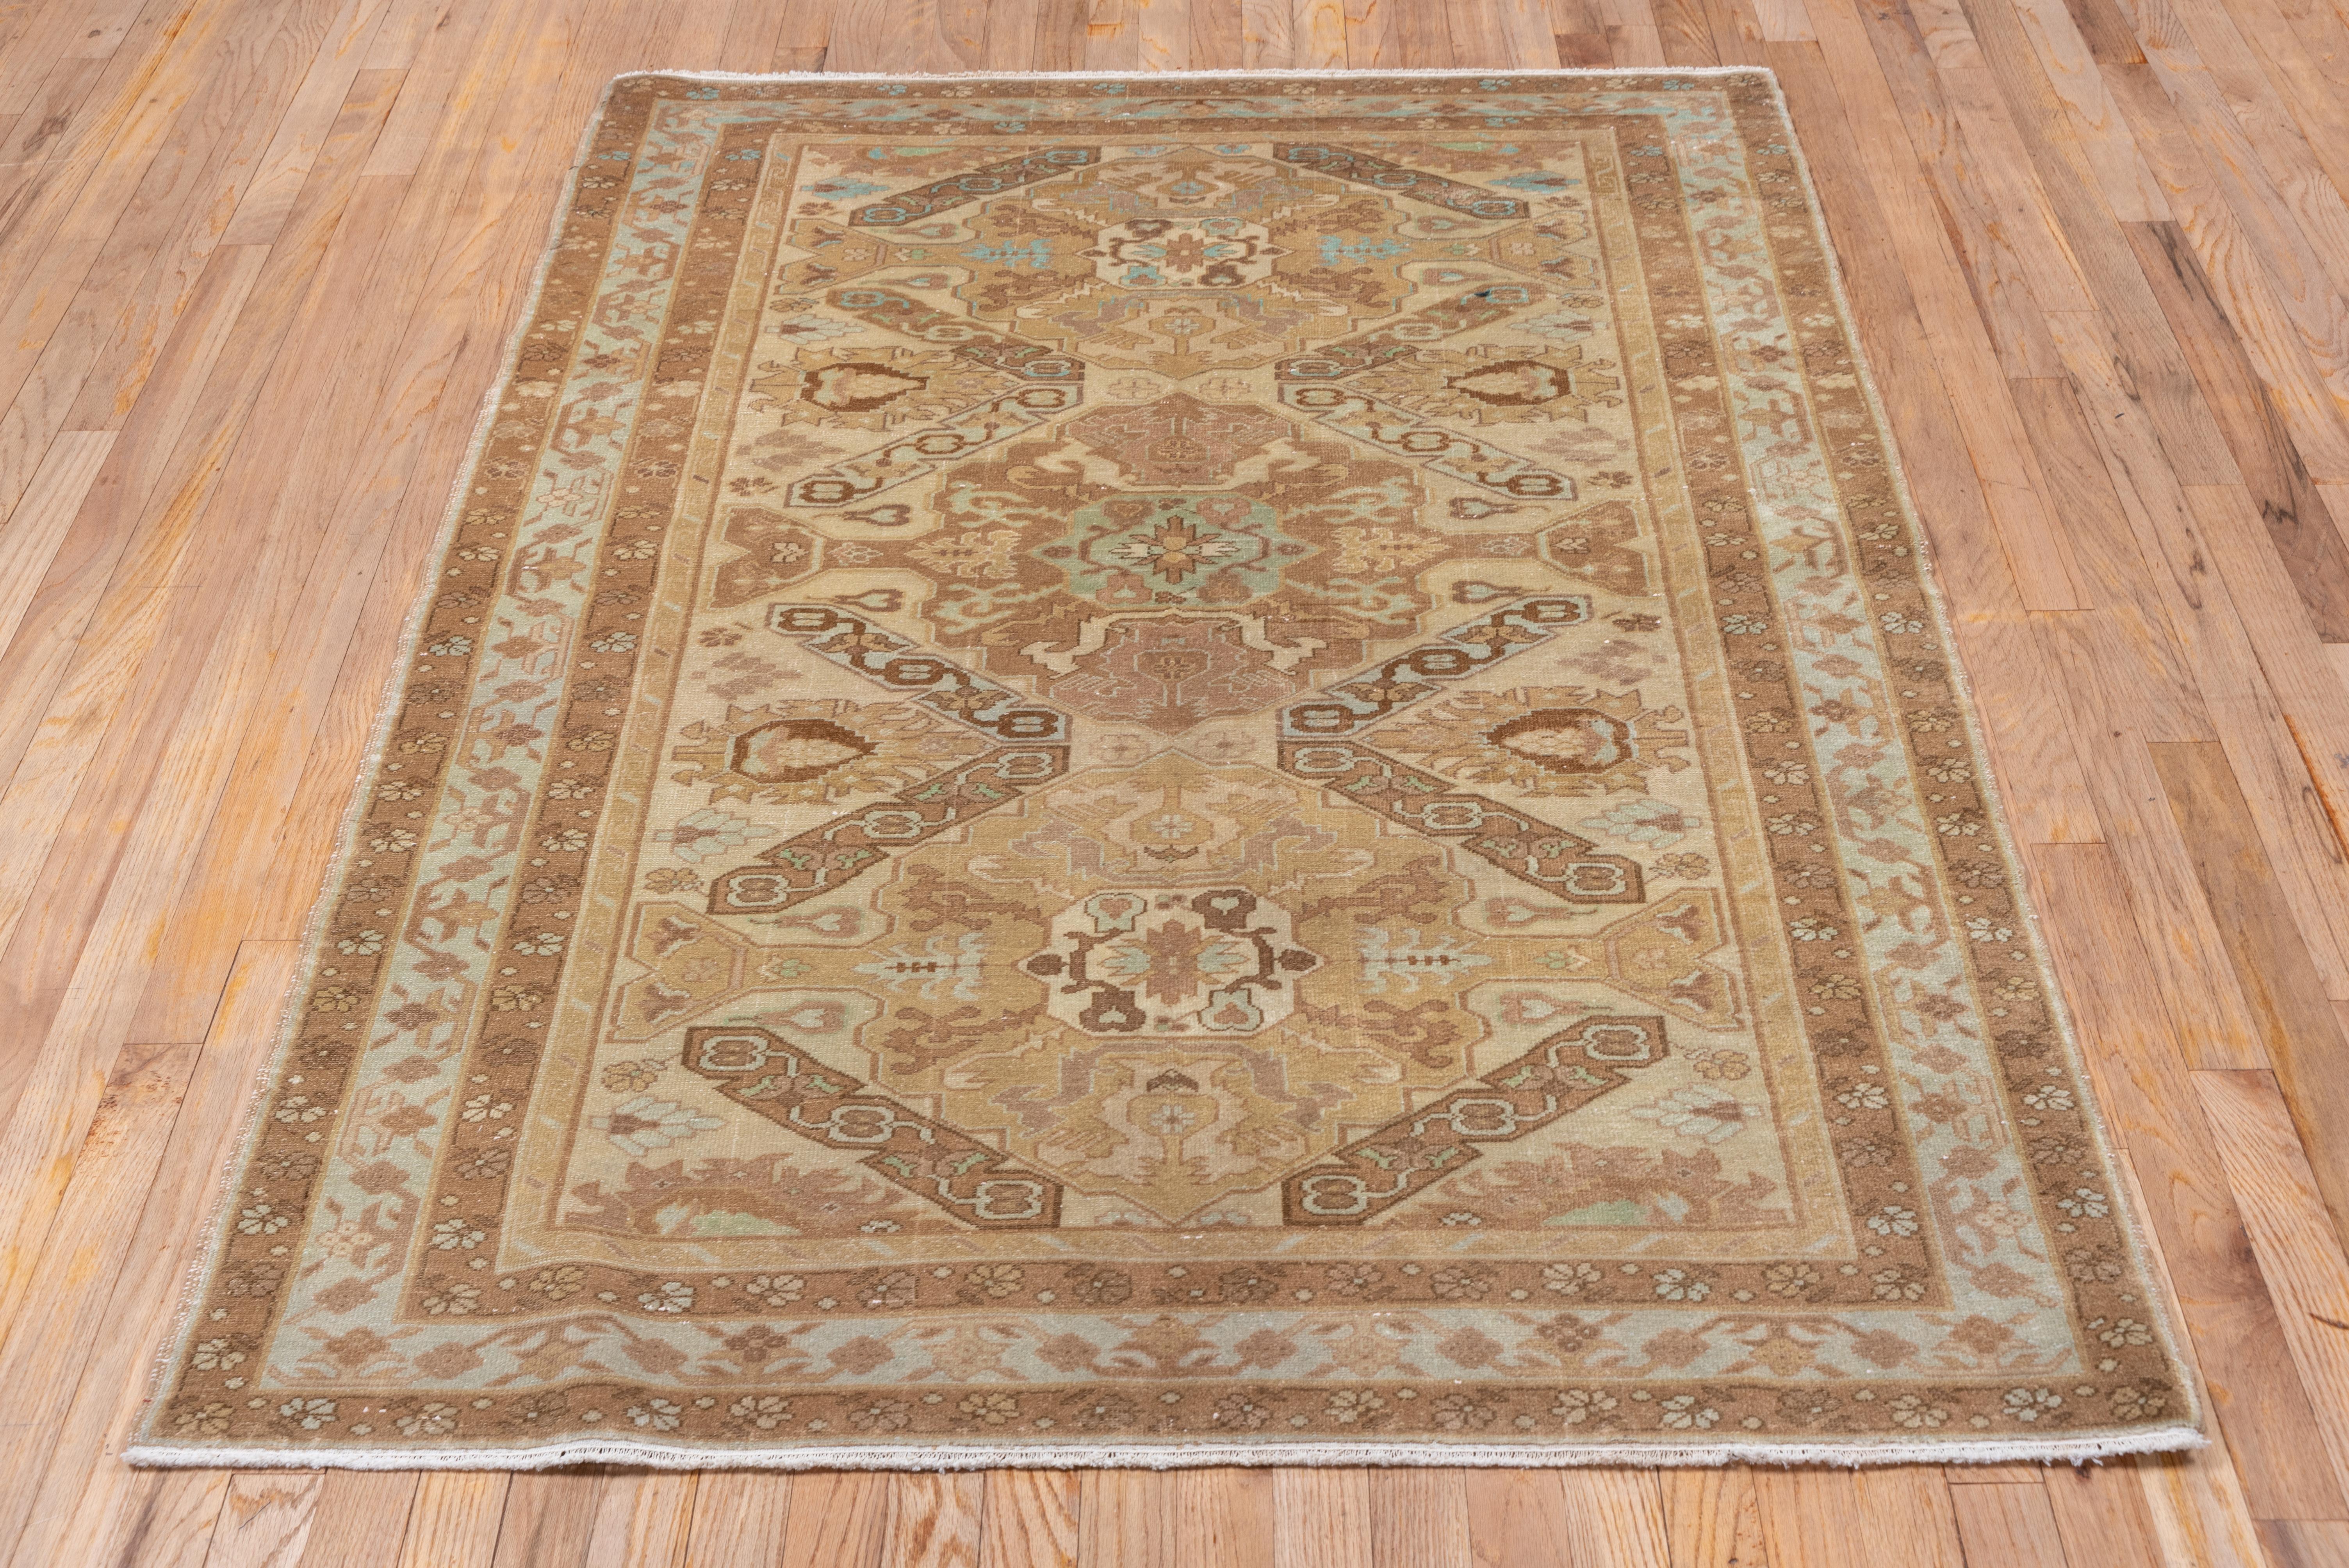 This eastern Turkish city scatter presents a totally Caucasian Kuba pattern of rough palmettes, oblique strips and geometrically lobed medallions, but in mellow tones of beige, rust-brown, pale grey, buff and sienna. The sand main border shows four